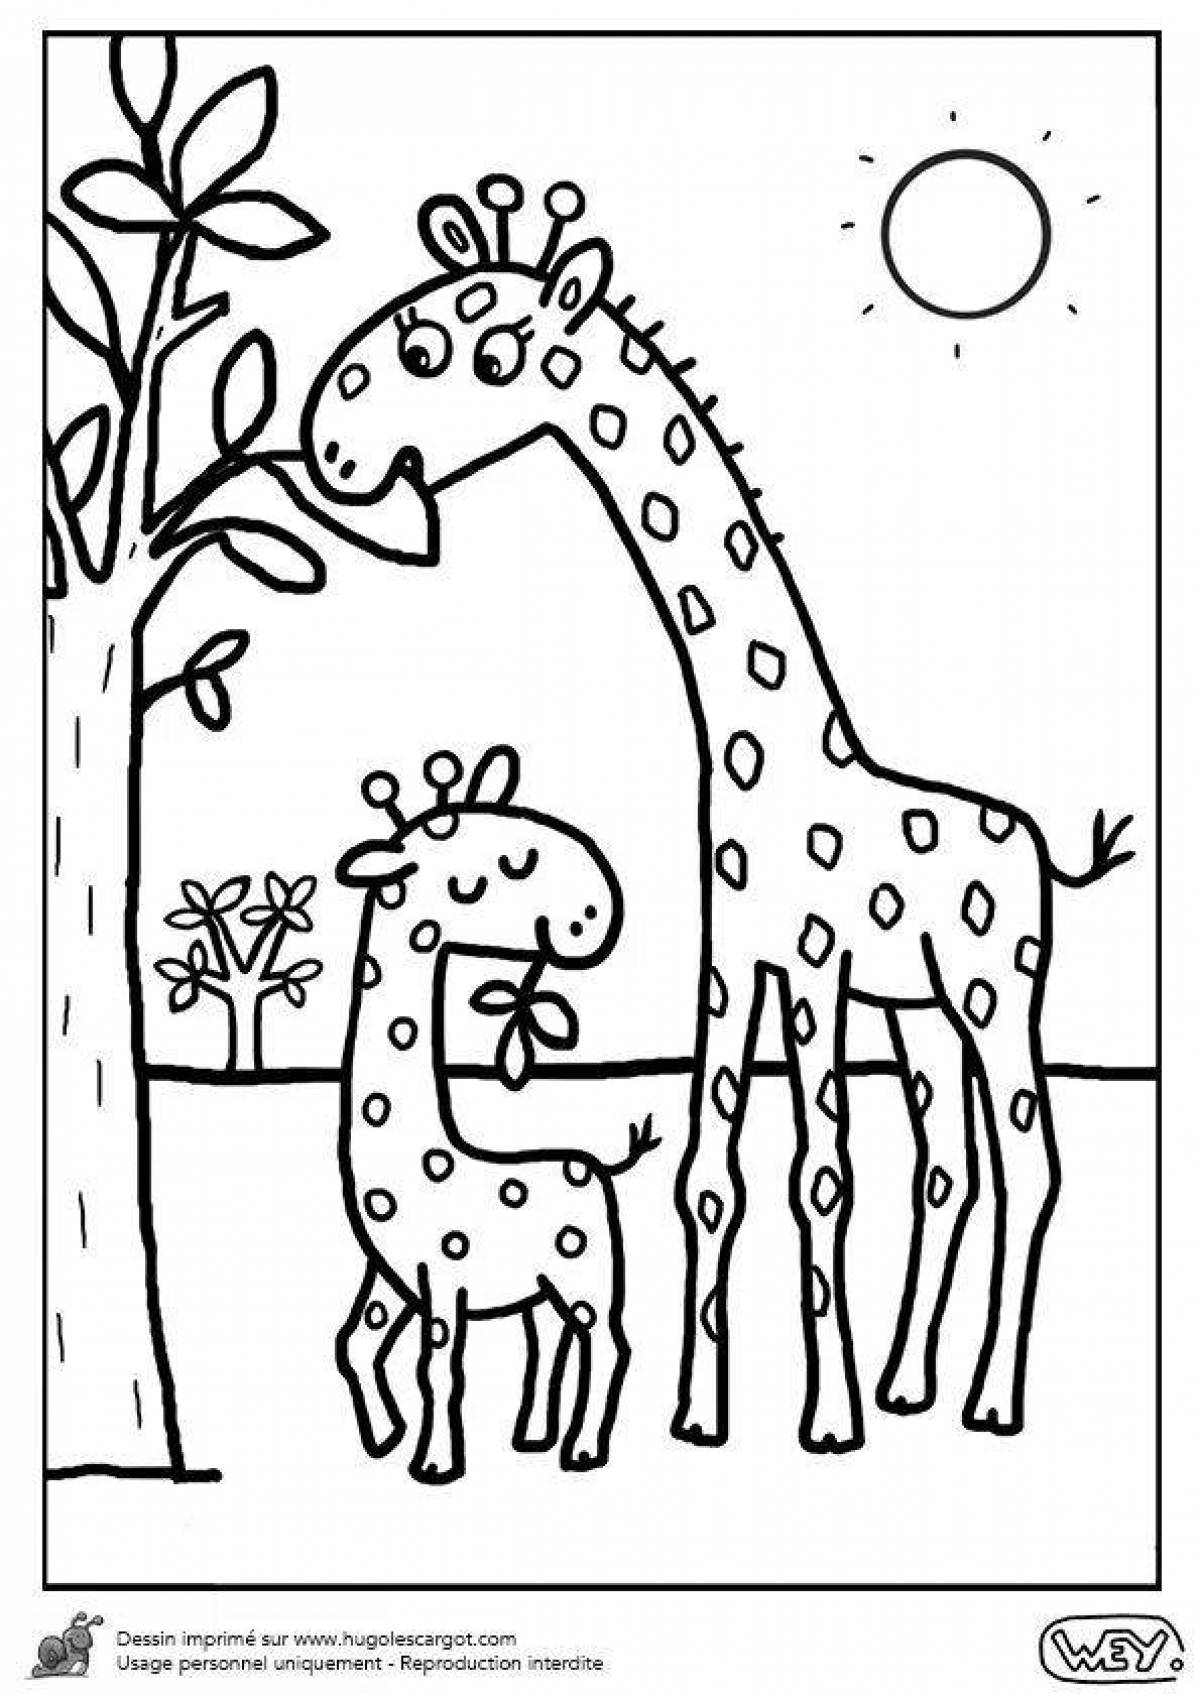 A funny giraffe coloring book for the little ones